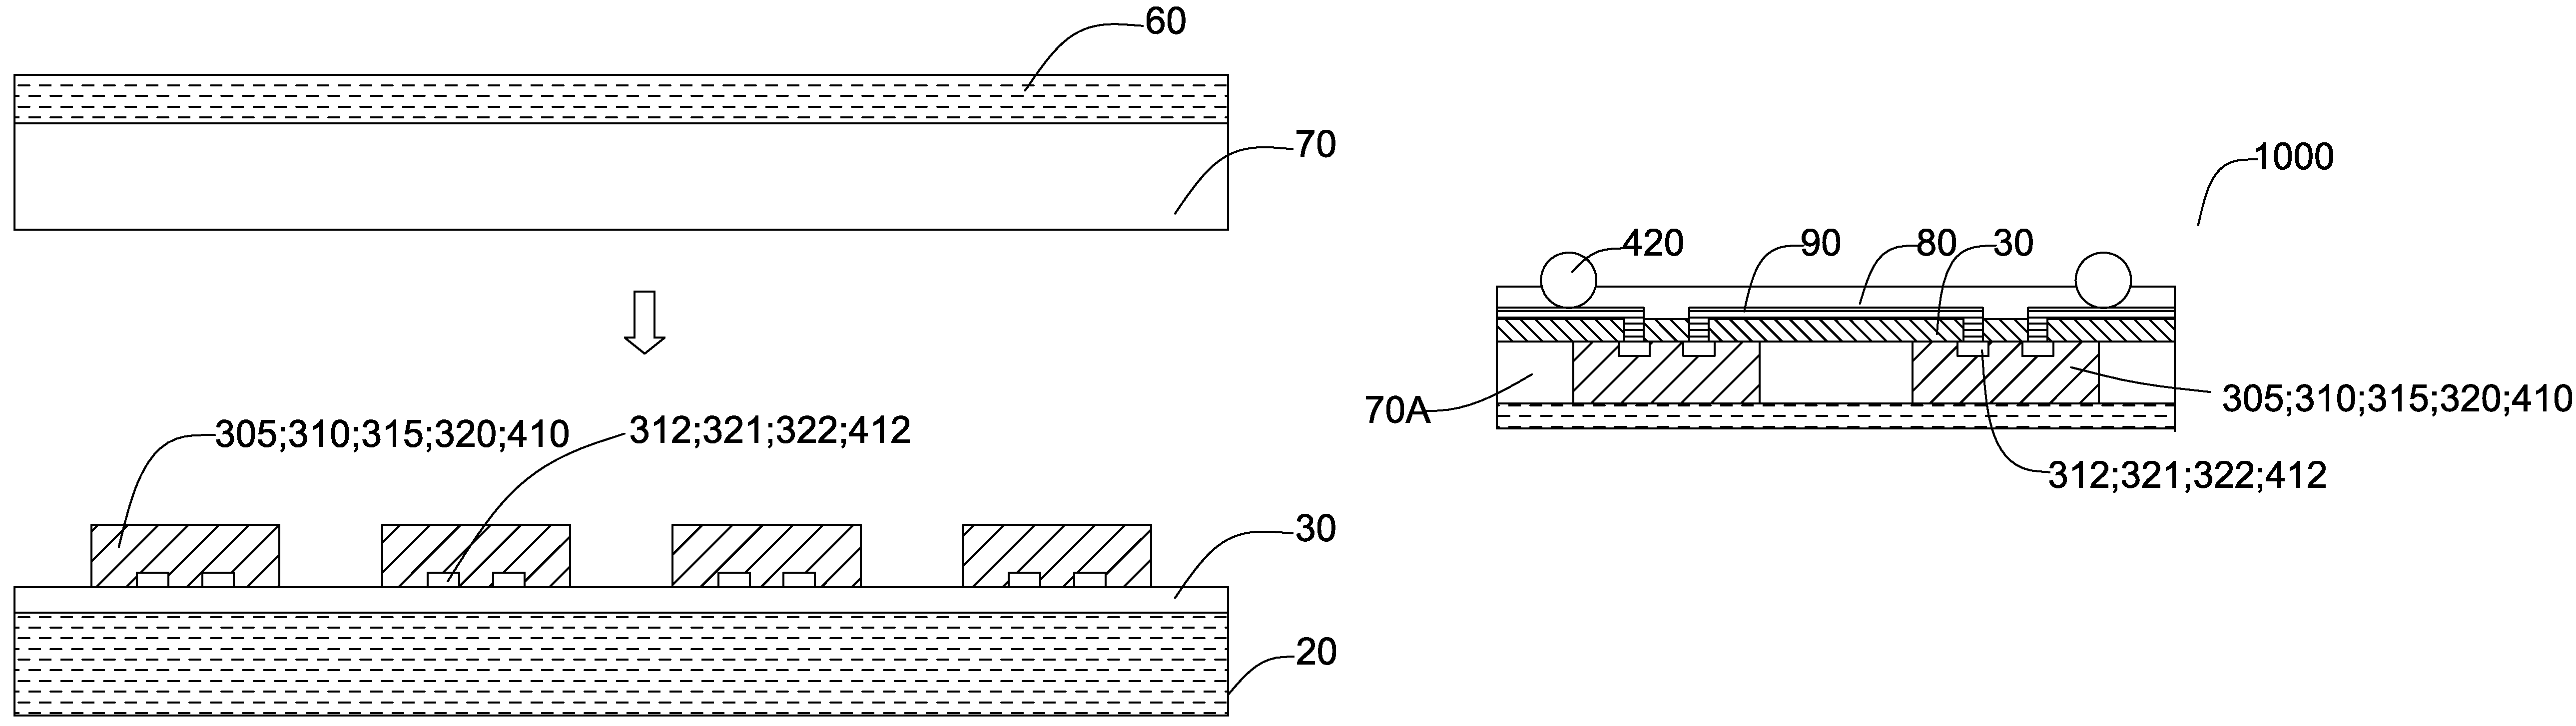 Die rearrangement package structure using layout process to form a compliant configuration